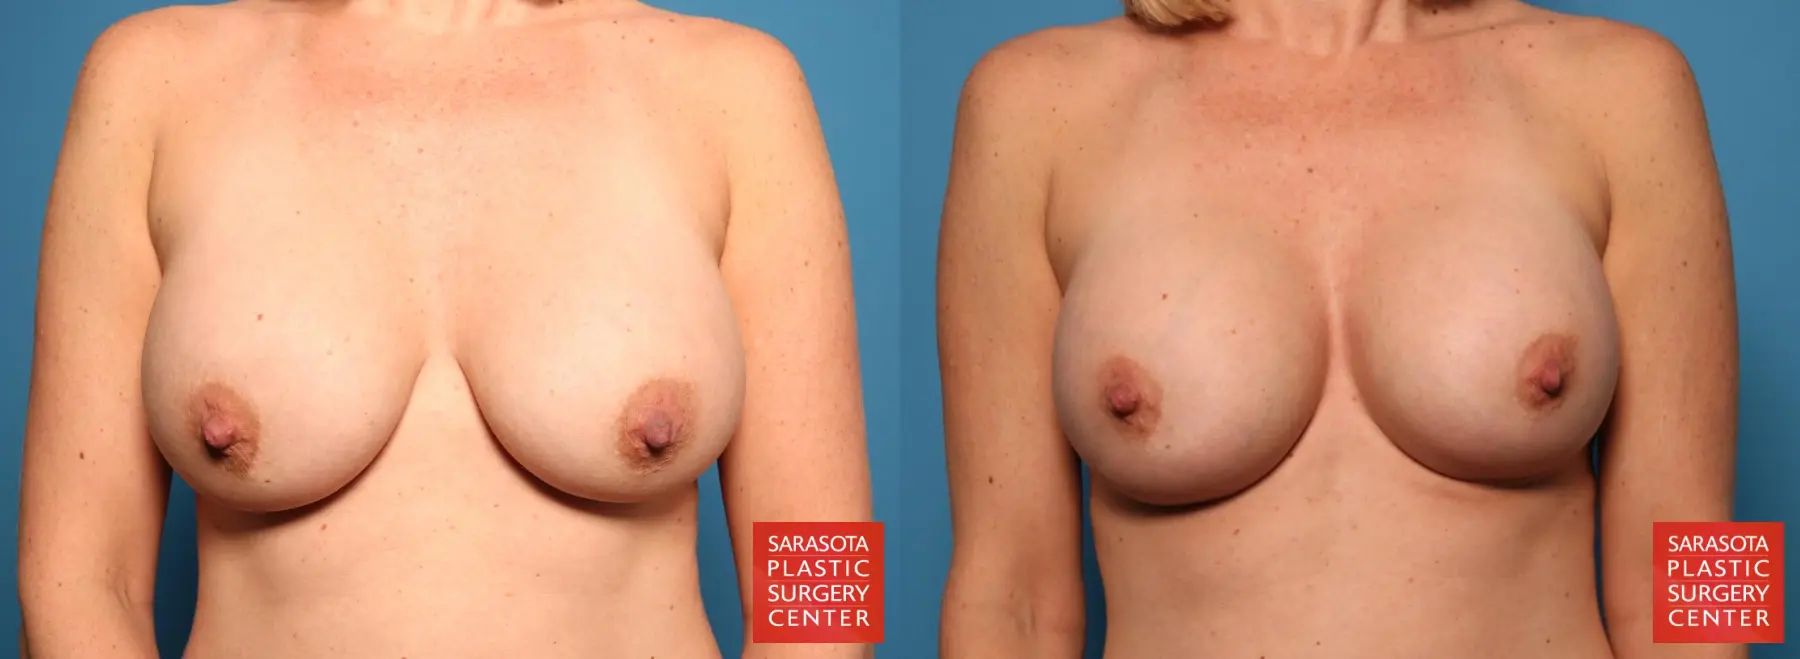 Breast Implant Removal/Replacement: Patient 1 - Before and After  